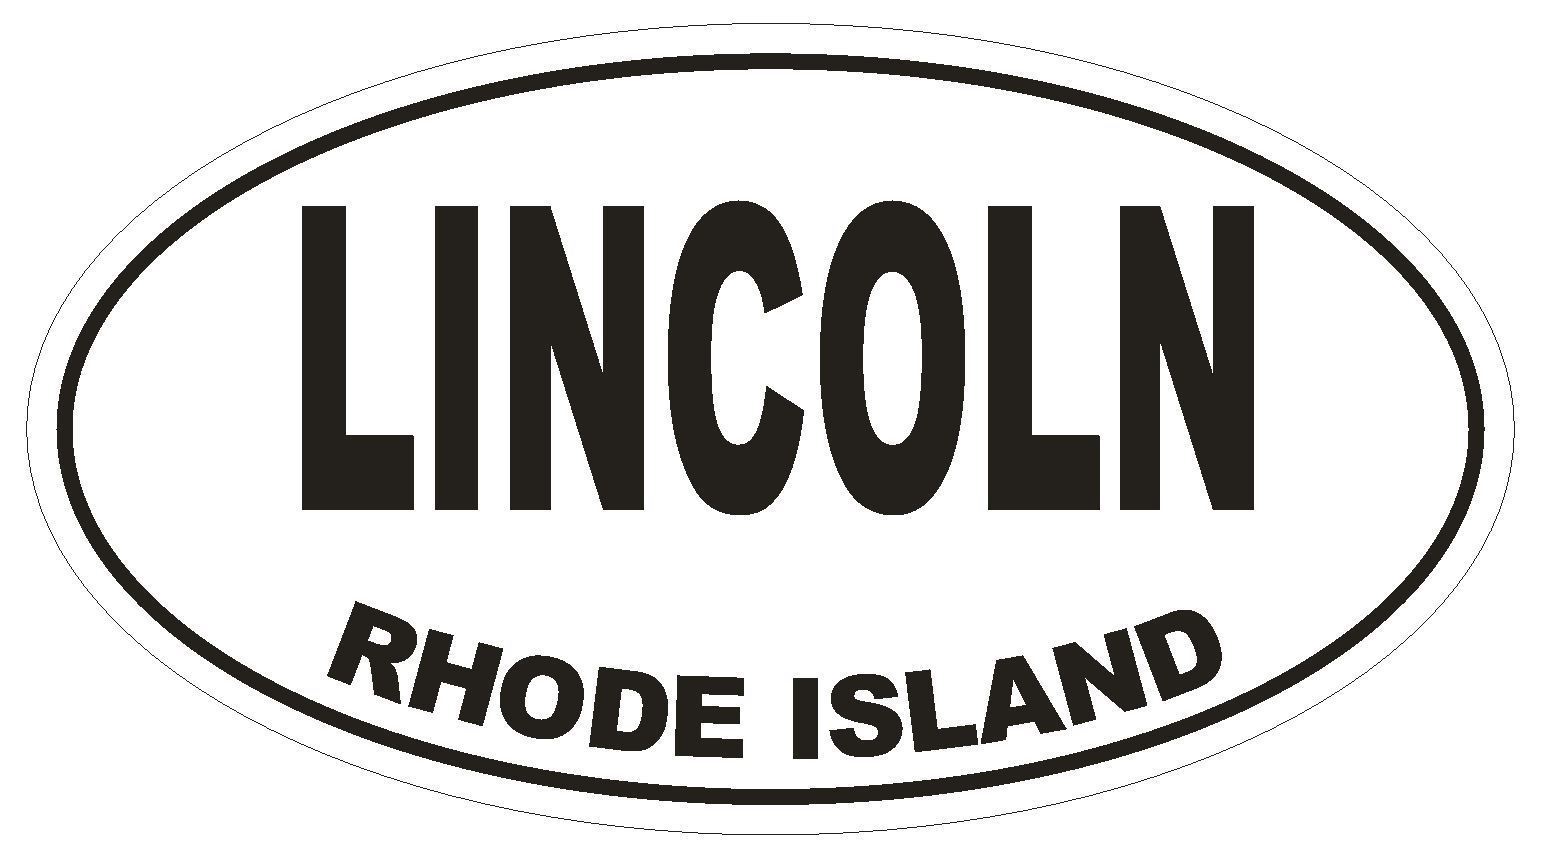 Primary image for Lincoln Rhode Island Oval Bumper Sticker or Helmet Sticker D1497 Euro Oval